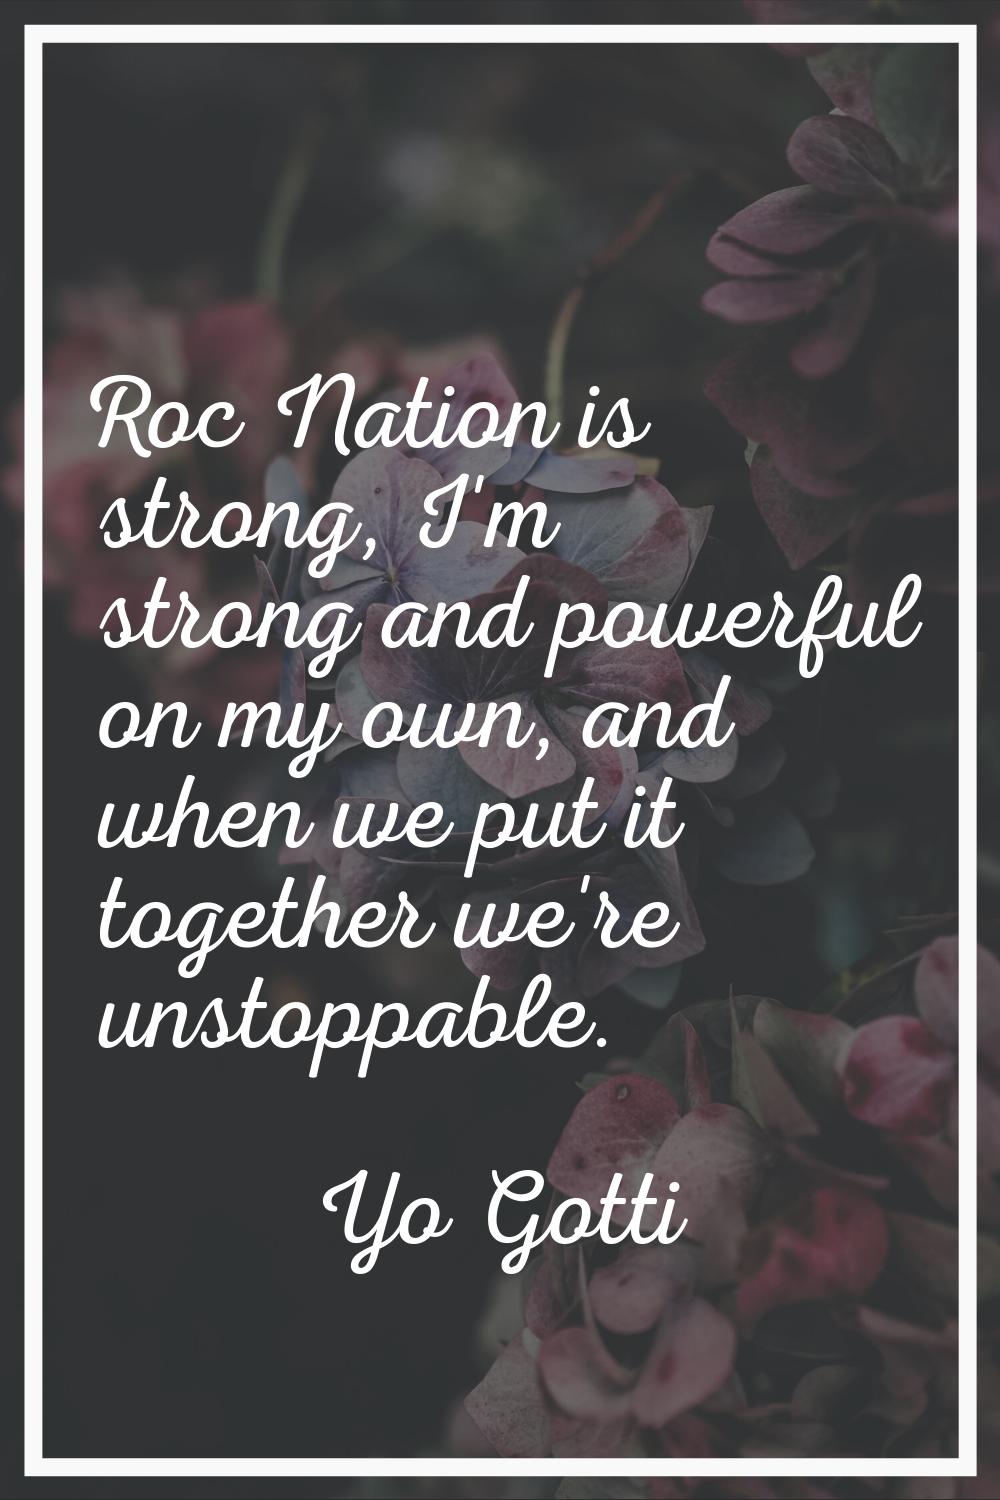 Roc Nation is strong, I'm strong and powerful on my own, and when we put it together we're unstoppa